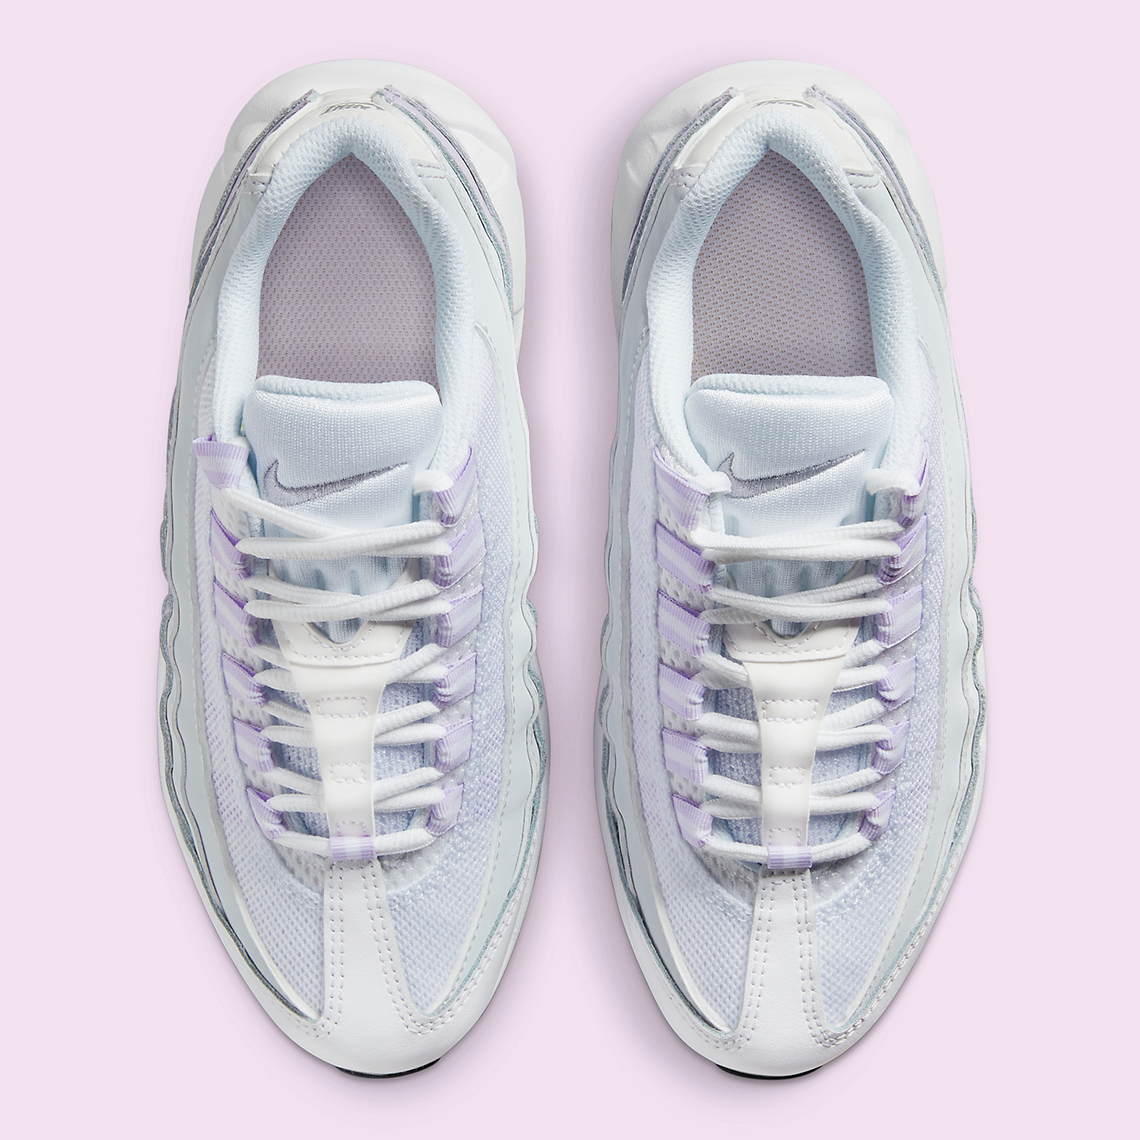 nike air max 95 gs violet frost CJ3906 108 1